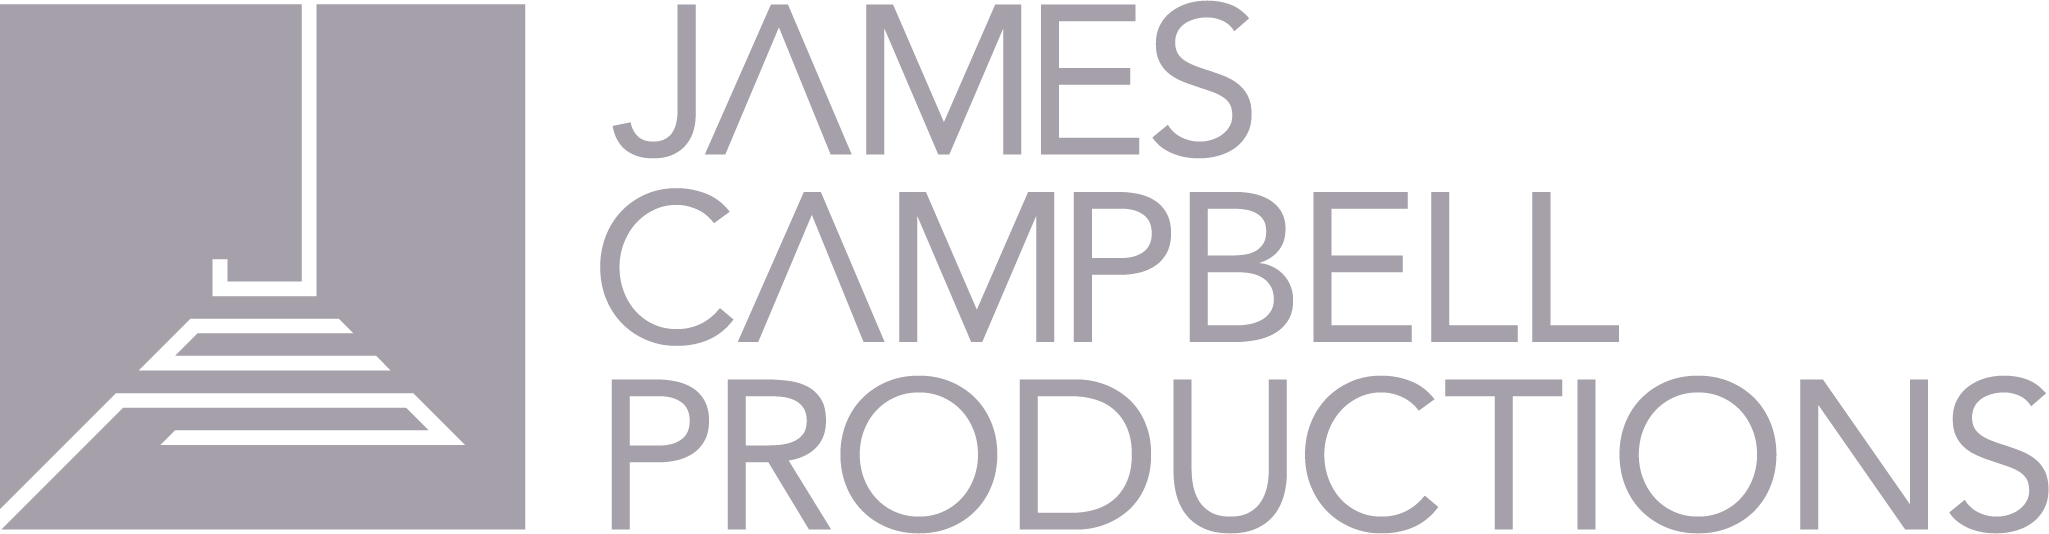 JAMES CAMPBELL PRODUCTIONS 